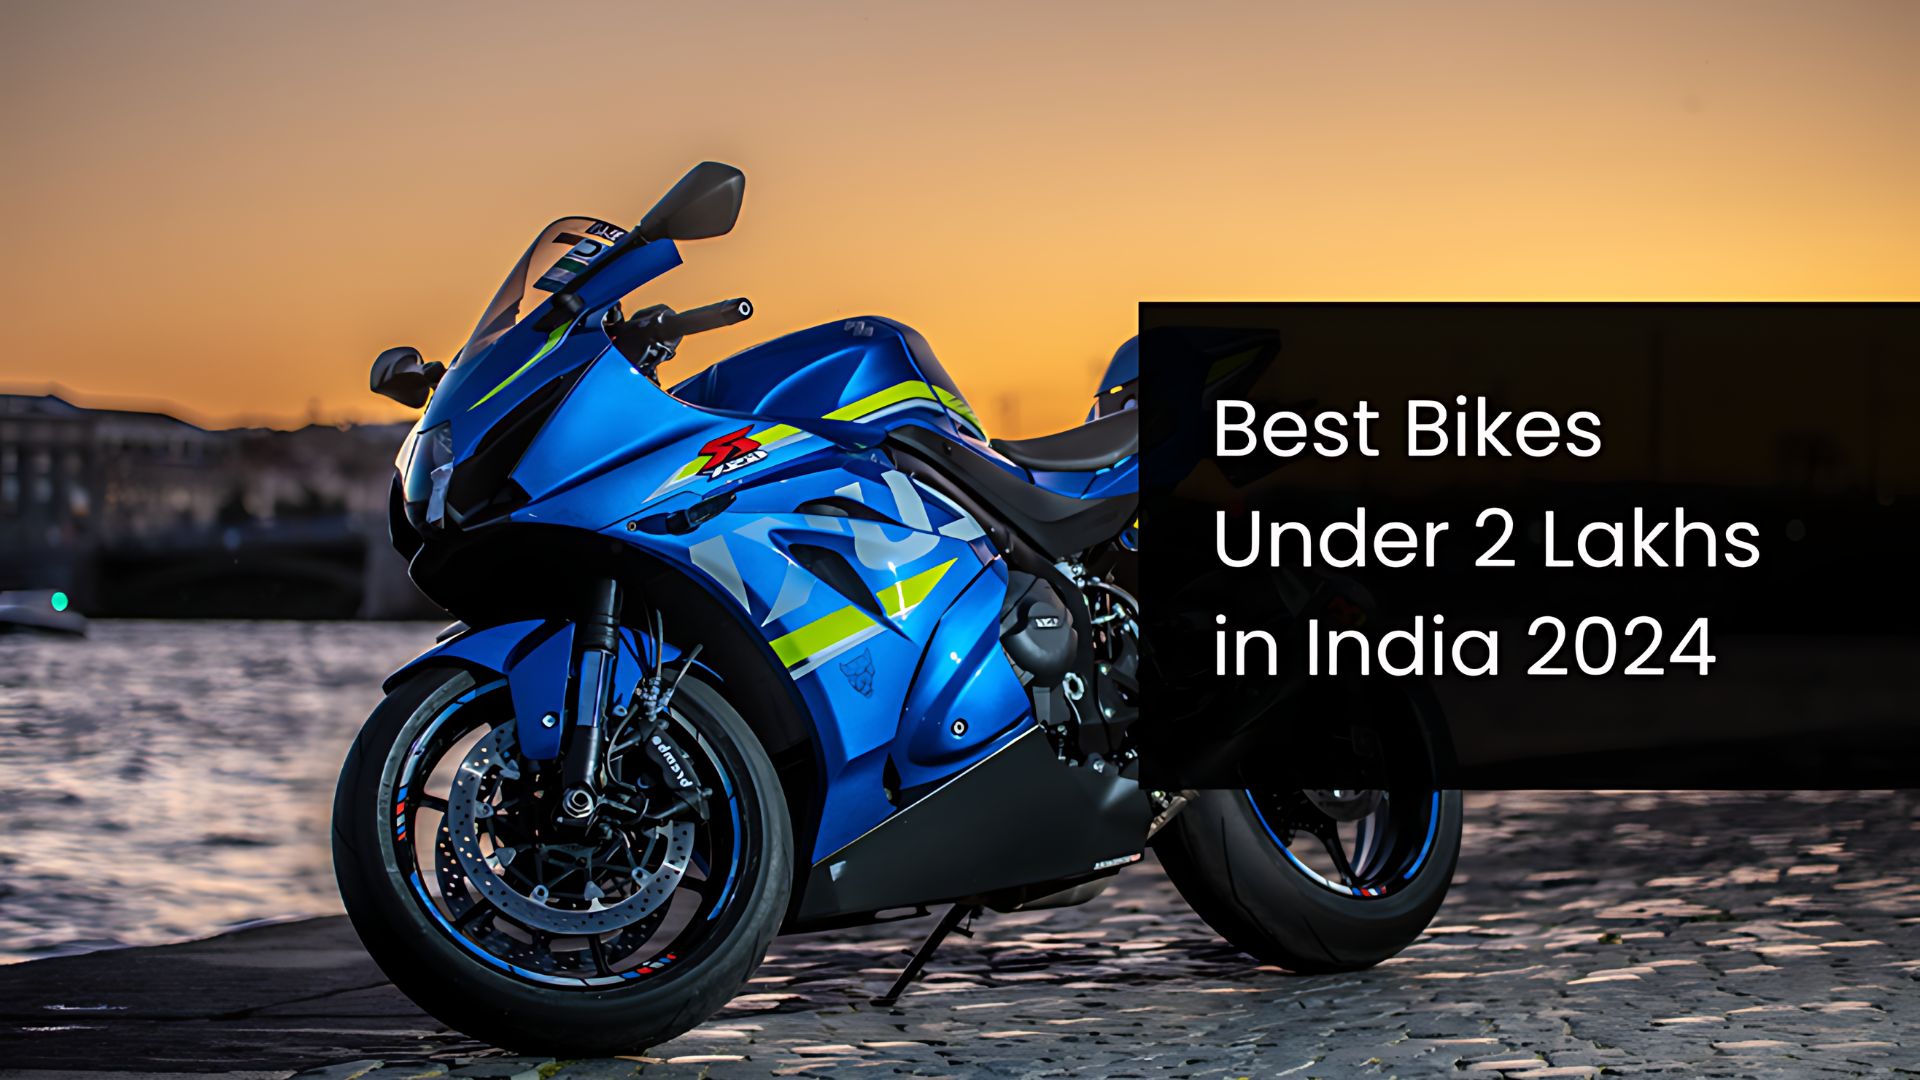 Top Bikes Under Rs. 2 Lakh In India In 2024